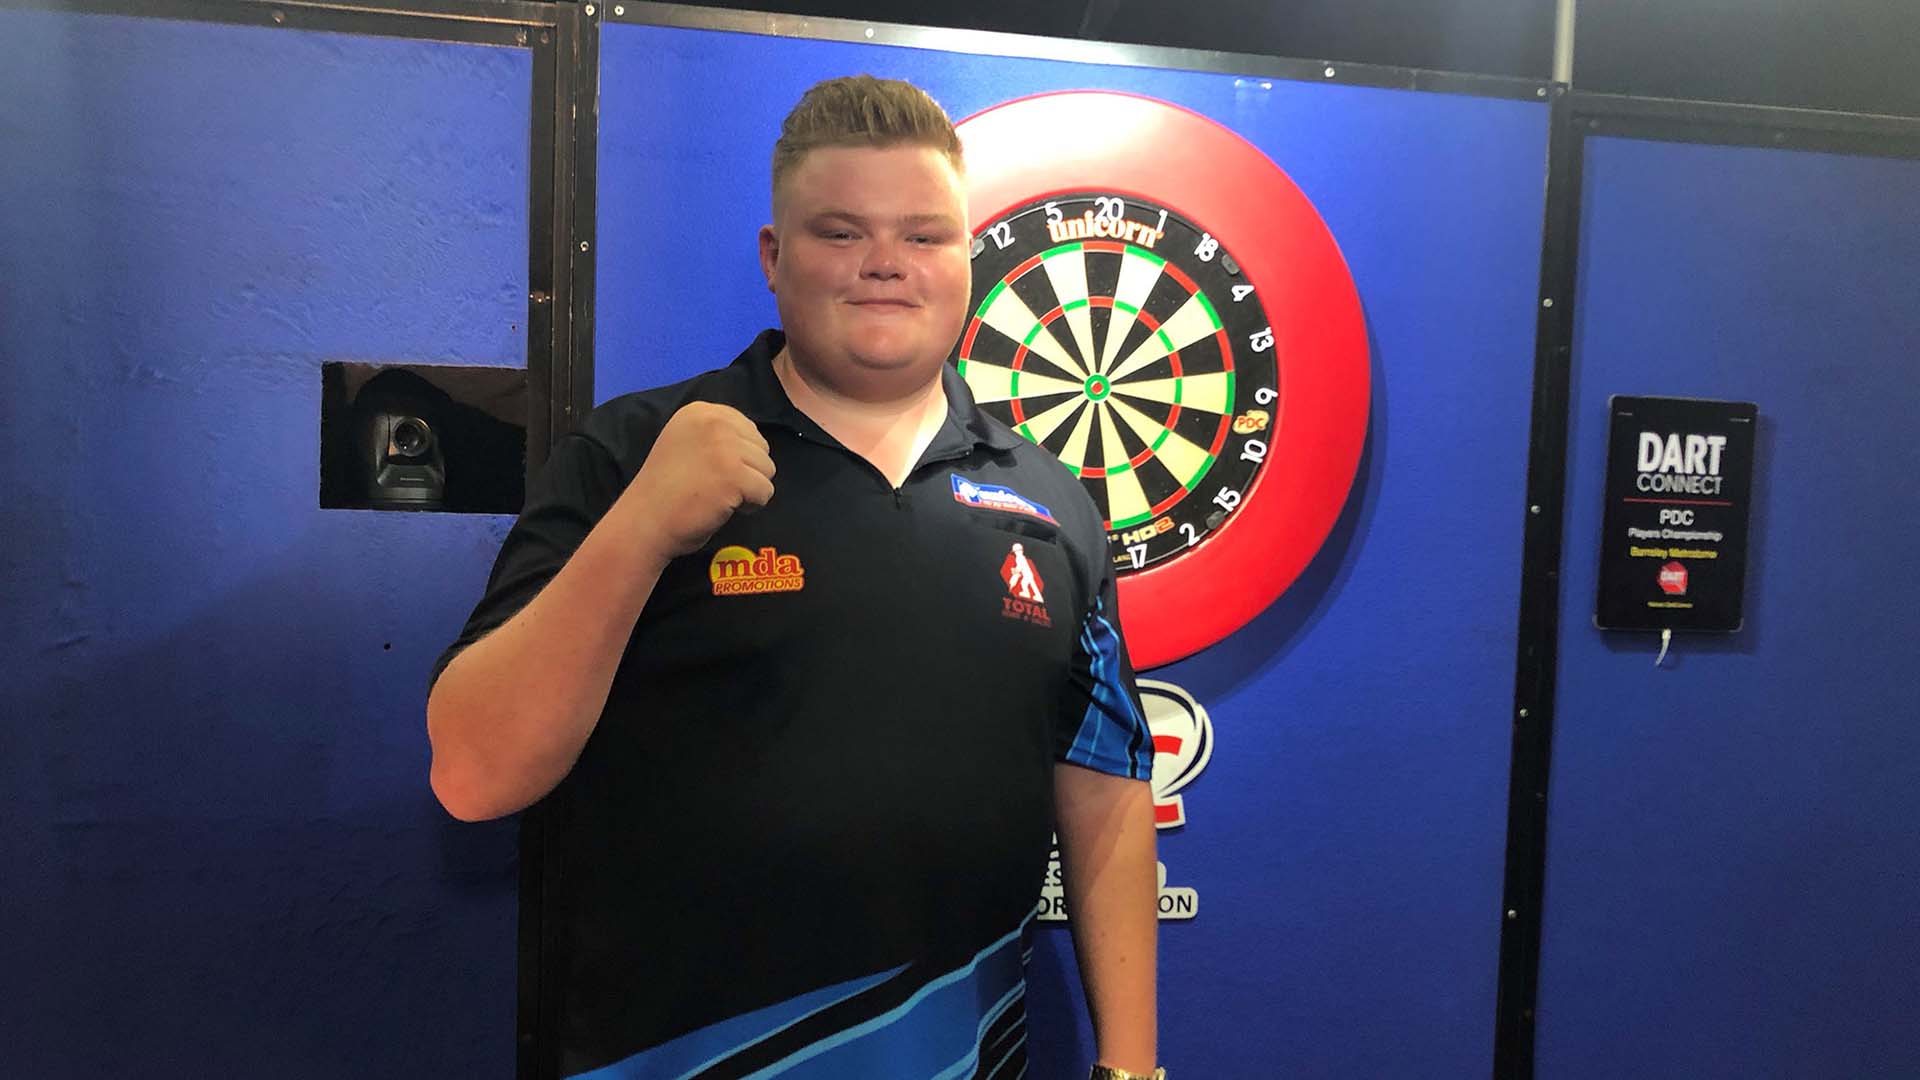 Darts results: Harry Ward claims maiden success on the PDC Tour with Players Championship 16 in Barnsley